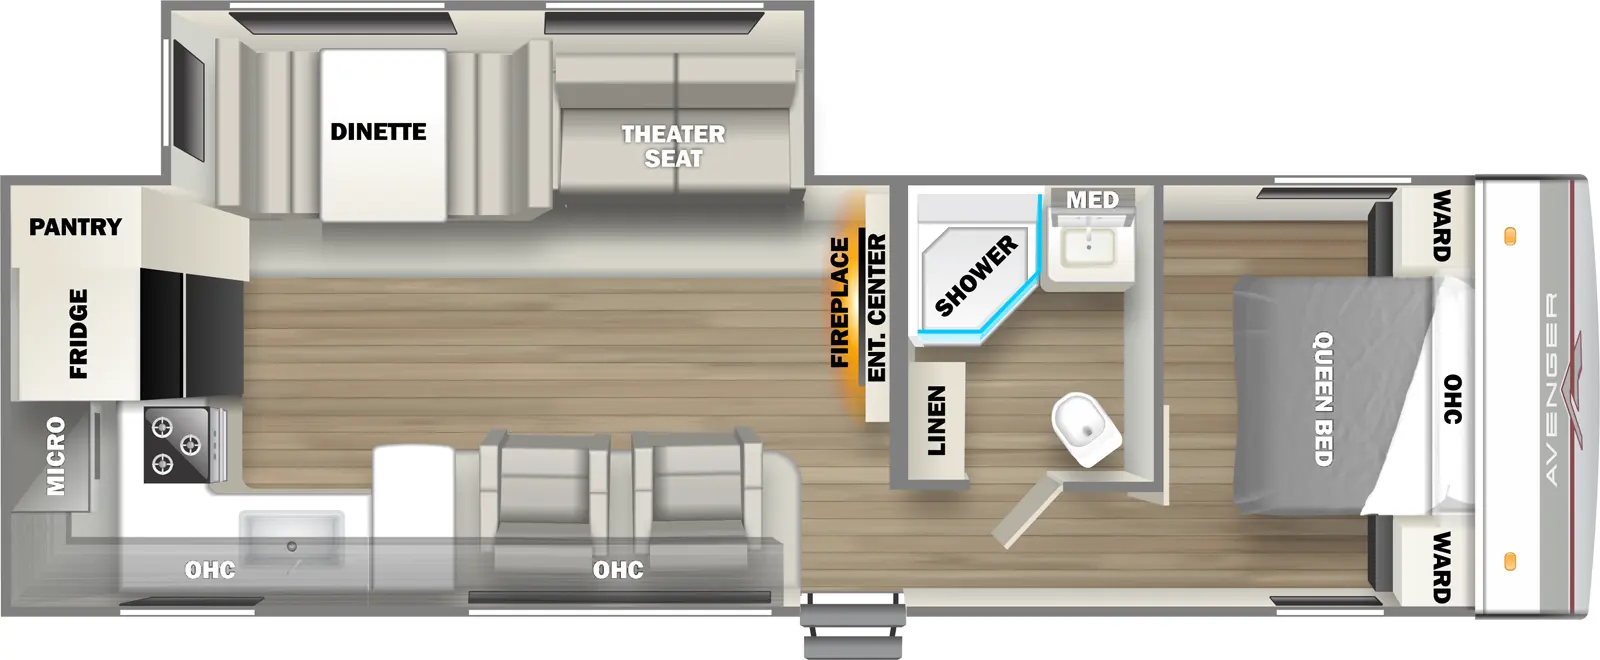 The 27RKS has one slideout and one entry. Interior layout front to back: foot facing queen bed with overhead cabinet and wardrobes on each side; off-door side full bathroom with linen closet and medicine cabinet; entertainment center with fireplace below along inner wall; off-door side slideout with theater seat and dinette; door side entry, chair, and overhead cabinet that goes all the way to the rear kitchen with countertop with sink that wraps to rear wall with microwave, cooktop, refrigerator and pantry.